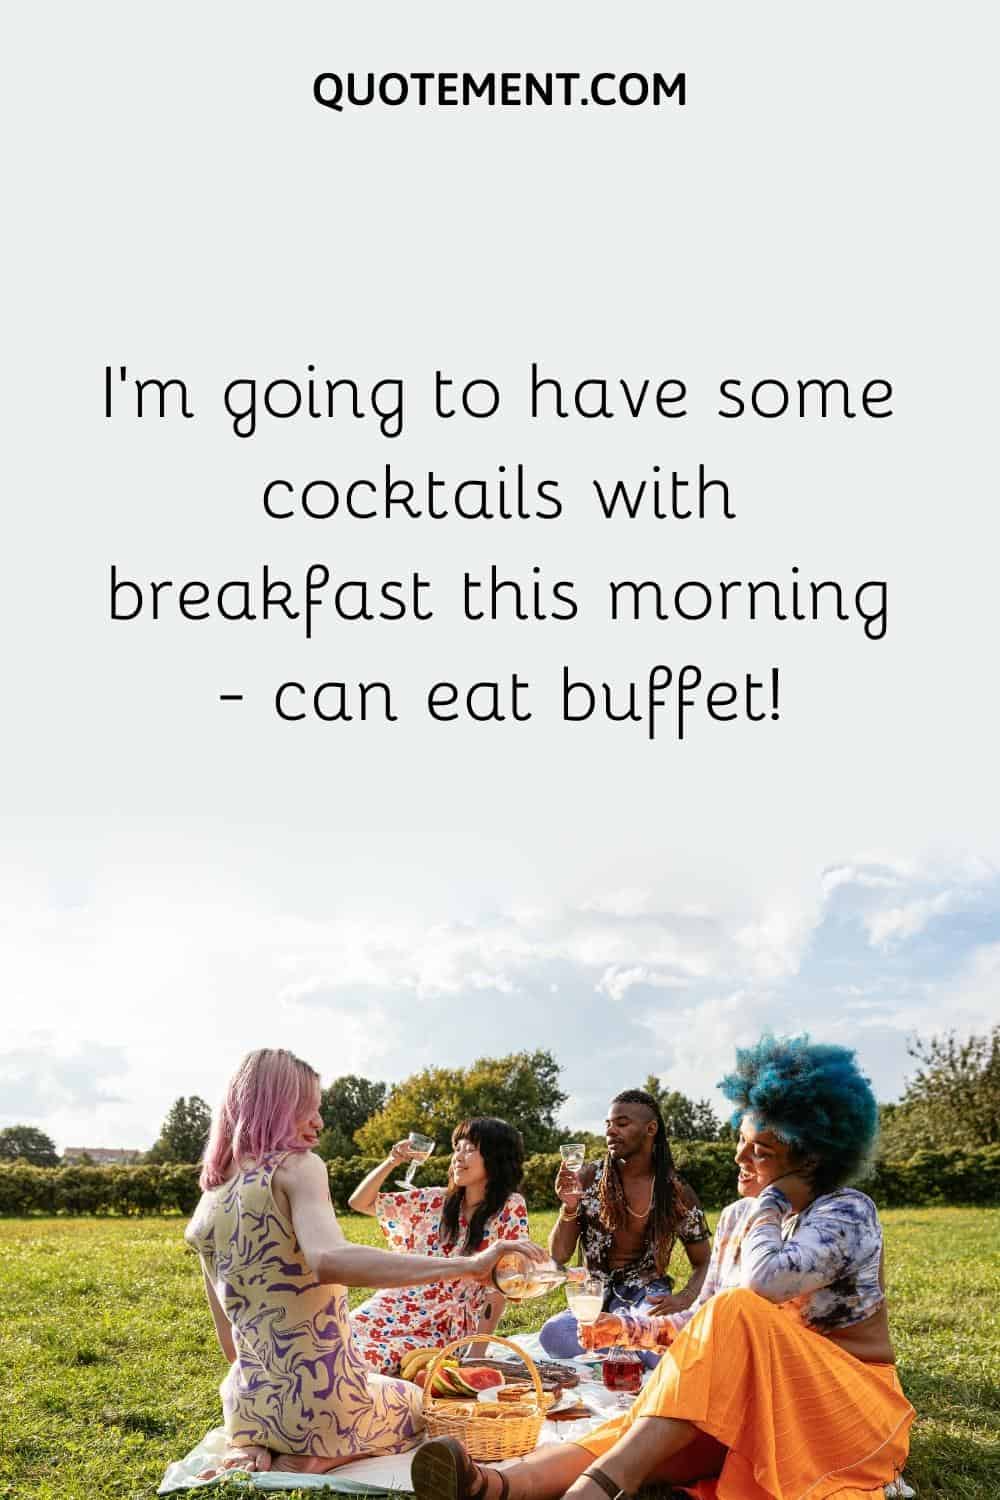 I'm going to have some cocktails with breakfast this morning - can eat buffet!